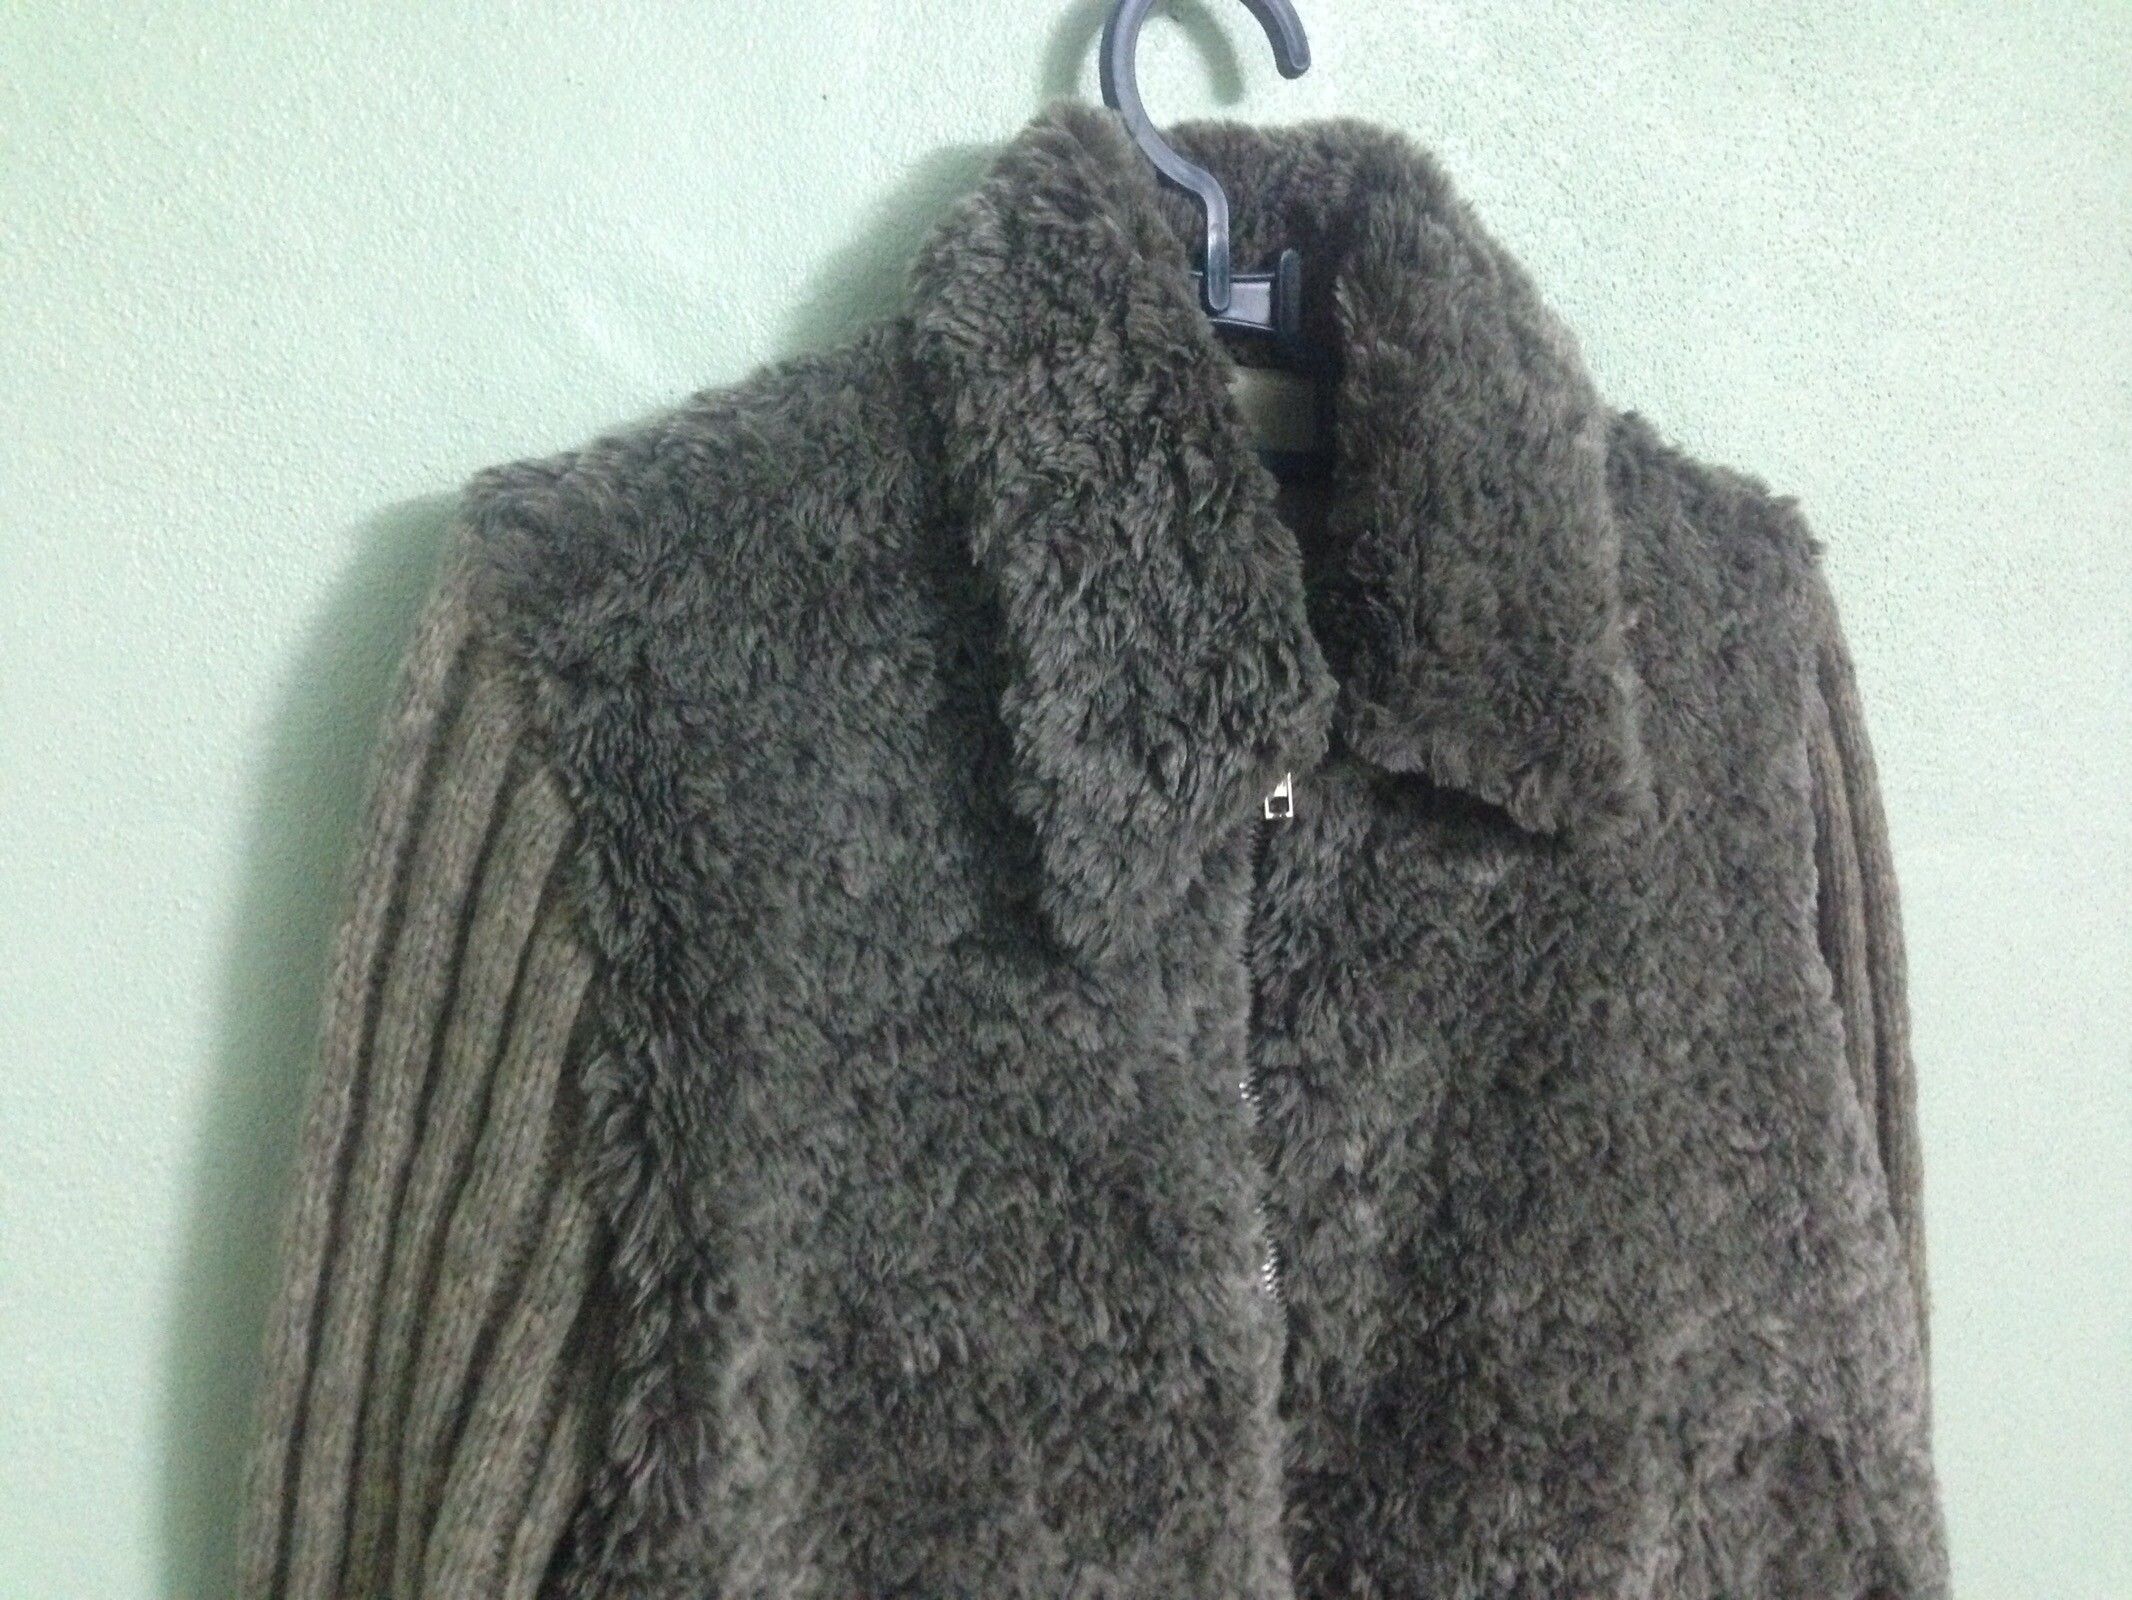 Japanese Brand - LAST DROP !! Max & Co Faux Fur Jacket Only For Japan-GH2719 - 2